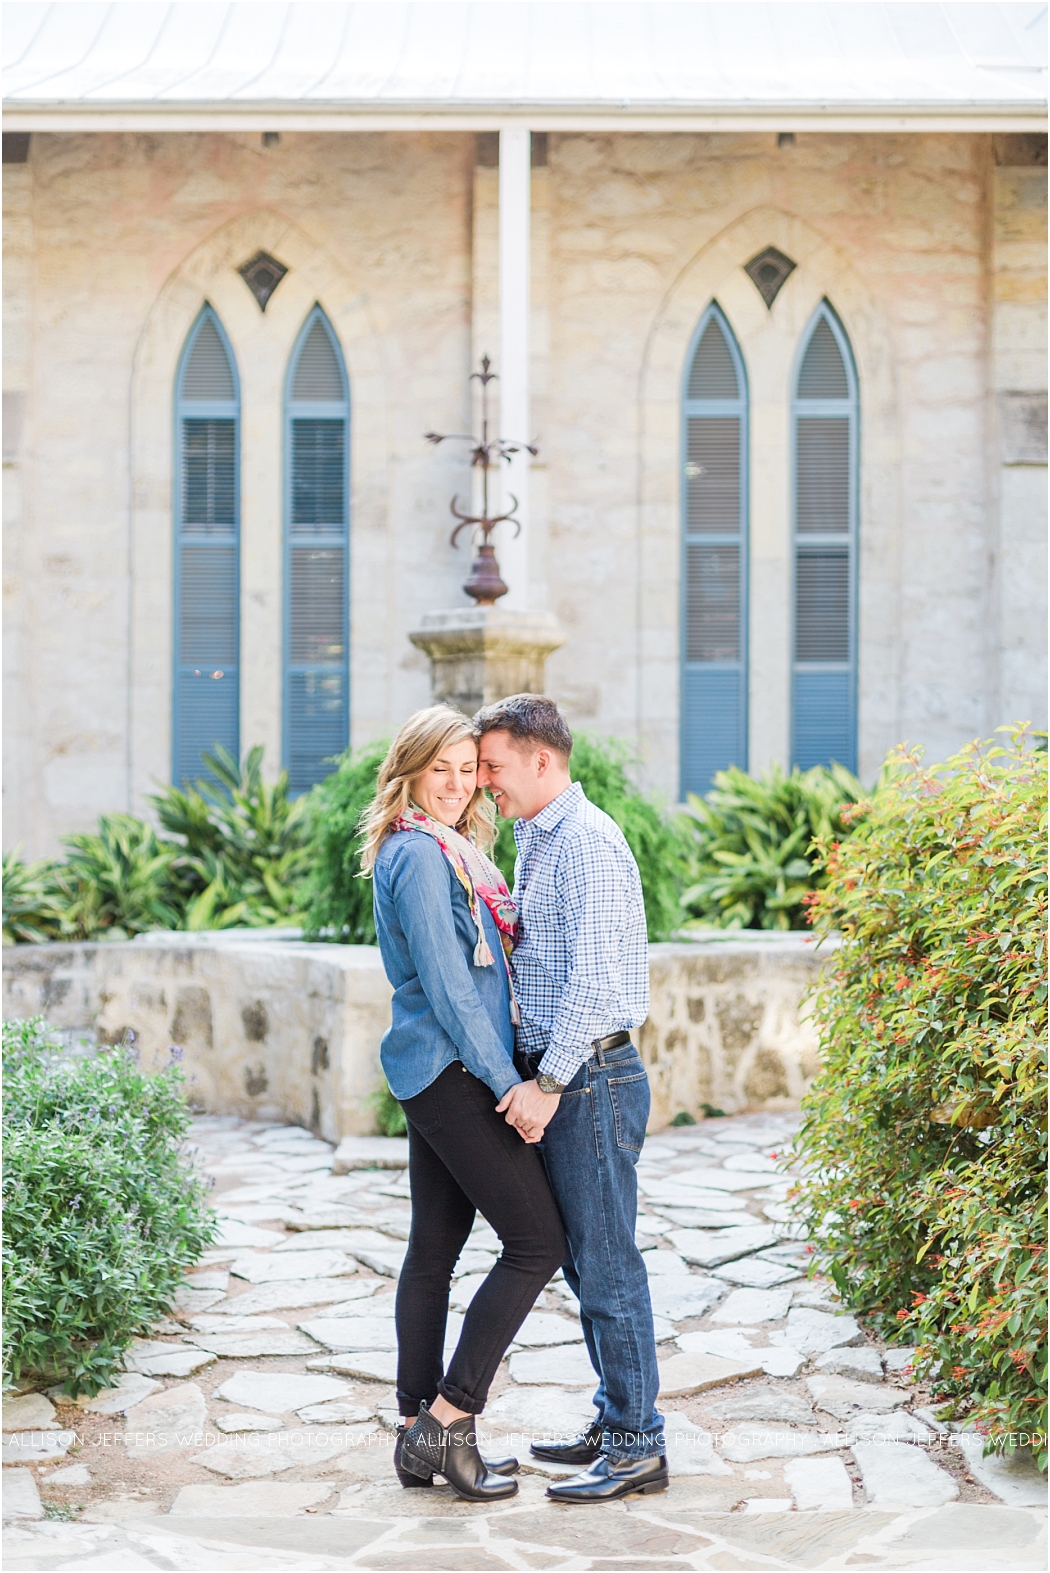 a-fall-engagement-session-at-southwest-school-of-art-in-san-antonio-by-allison-jeffers-wedding-photography_0007